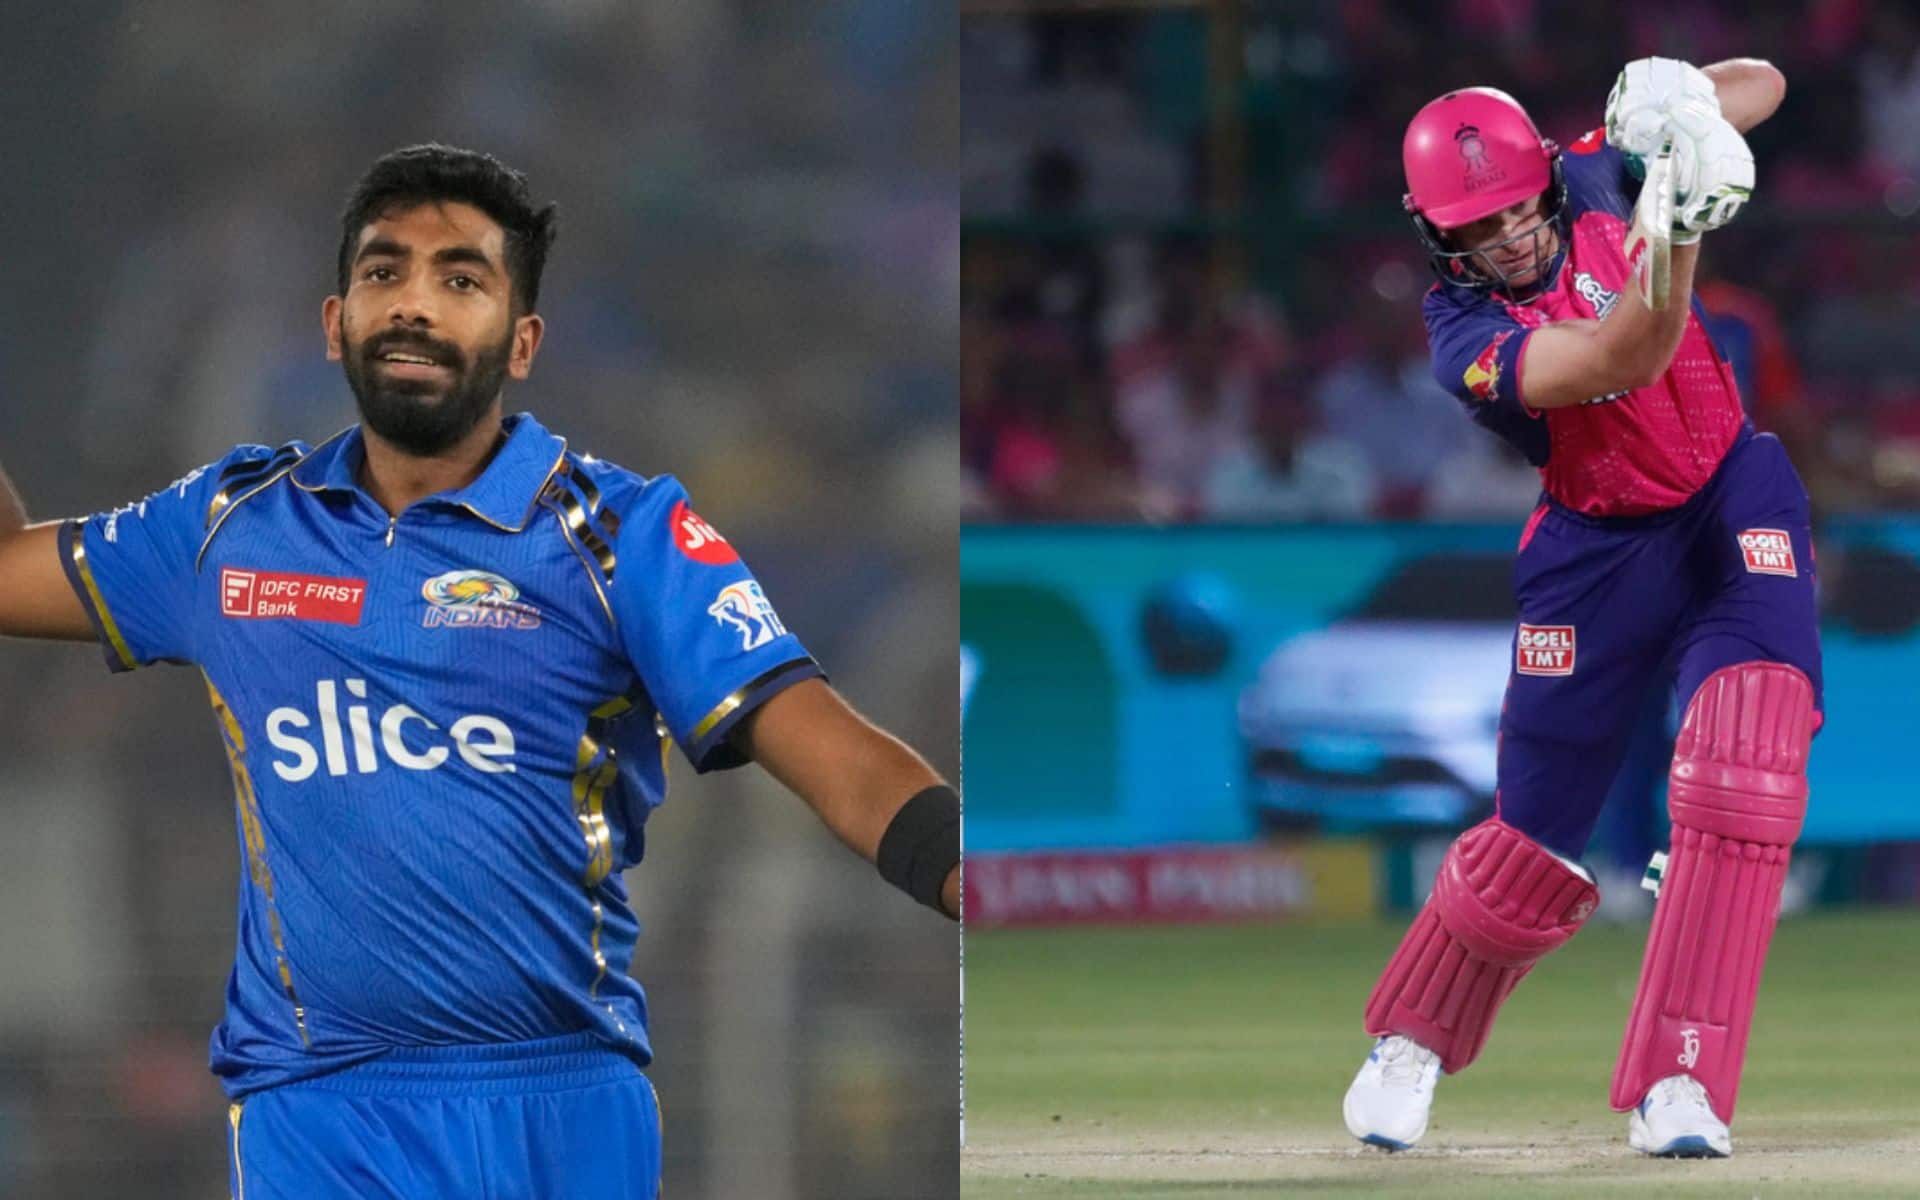 Bumrah Or Buttler, Who Will Outshine? - Top Player Battles To Watch Out For In MI vs RR